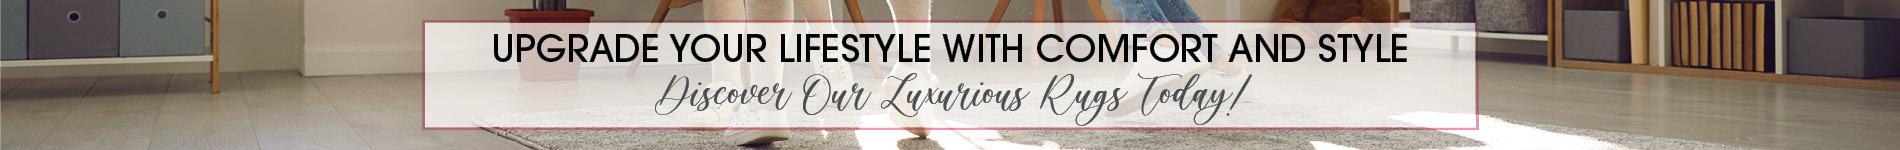 Upgrade your lifestyle with comfort and style. Discover our luxurious rugs today!